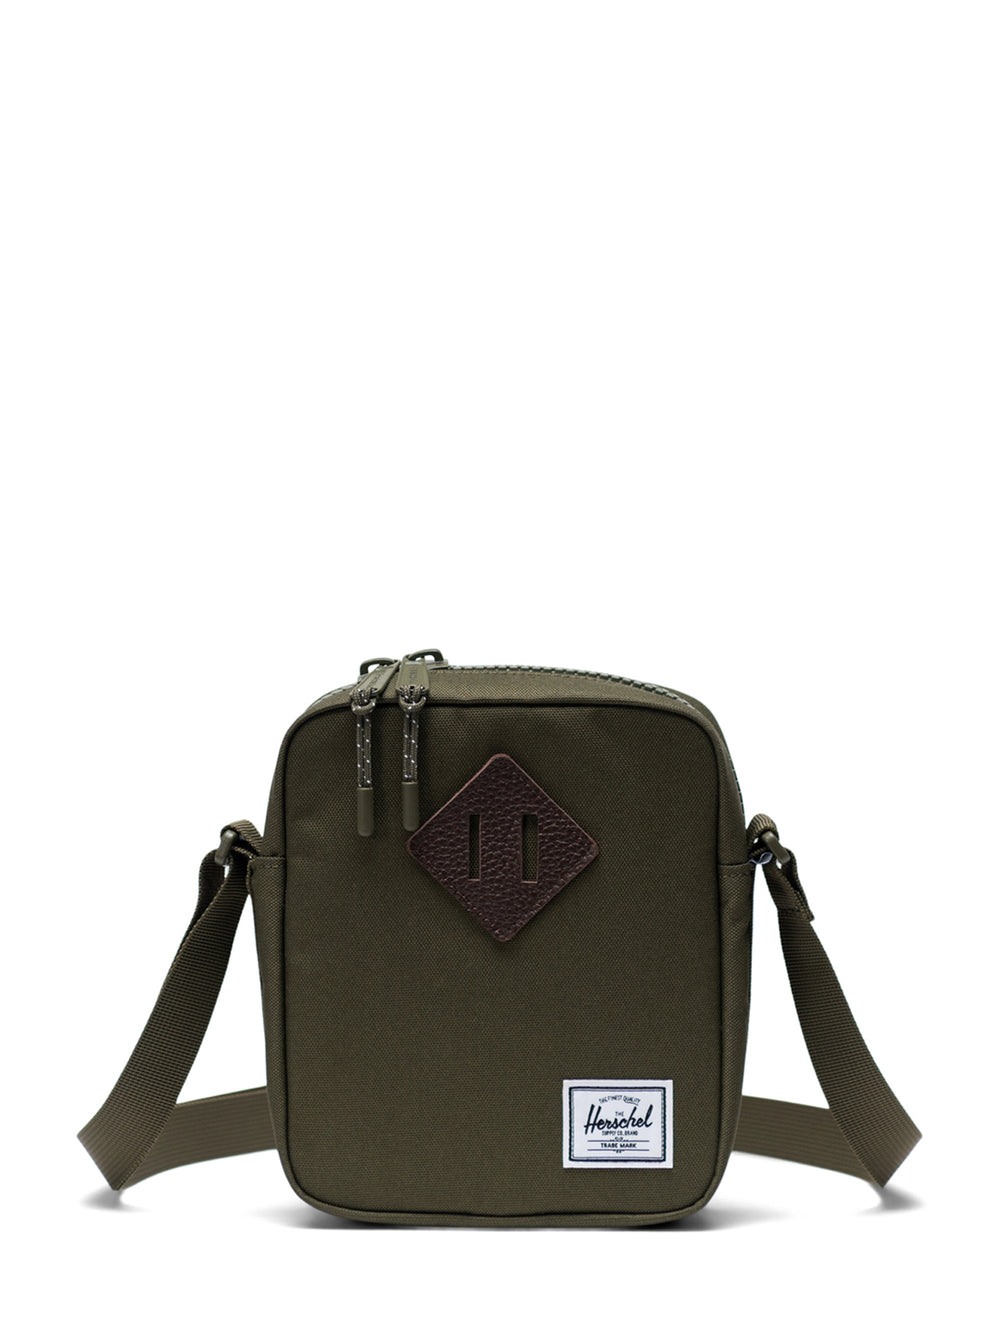 HERSCHEL SUPPLY CO. HERITAGE XBODY - CLEARANCE